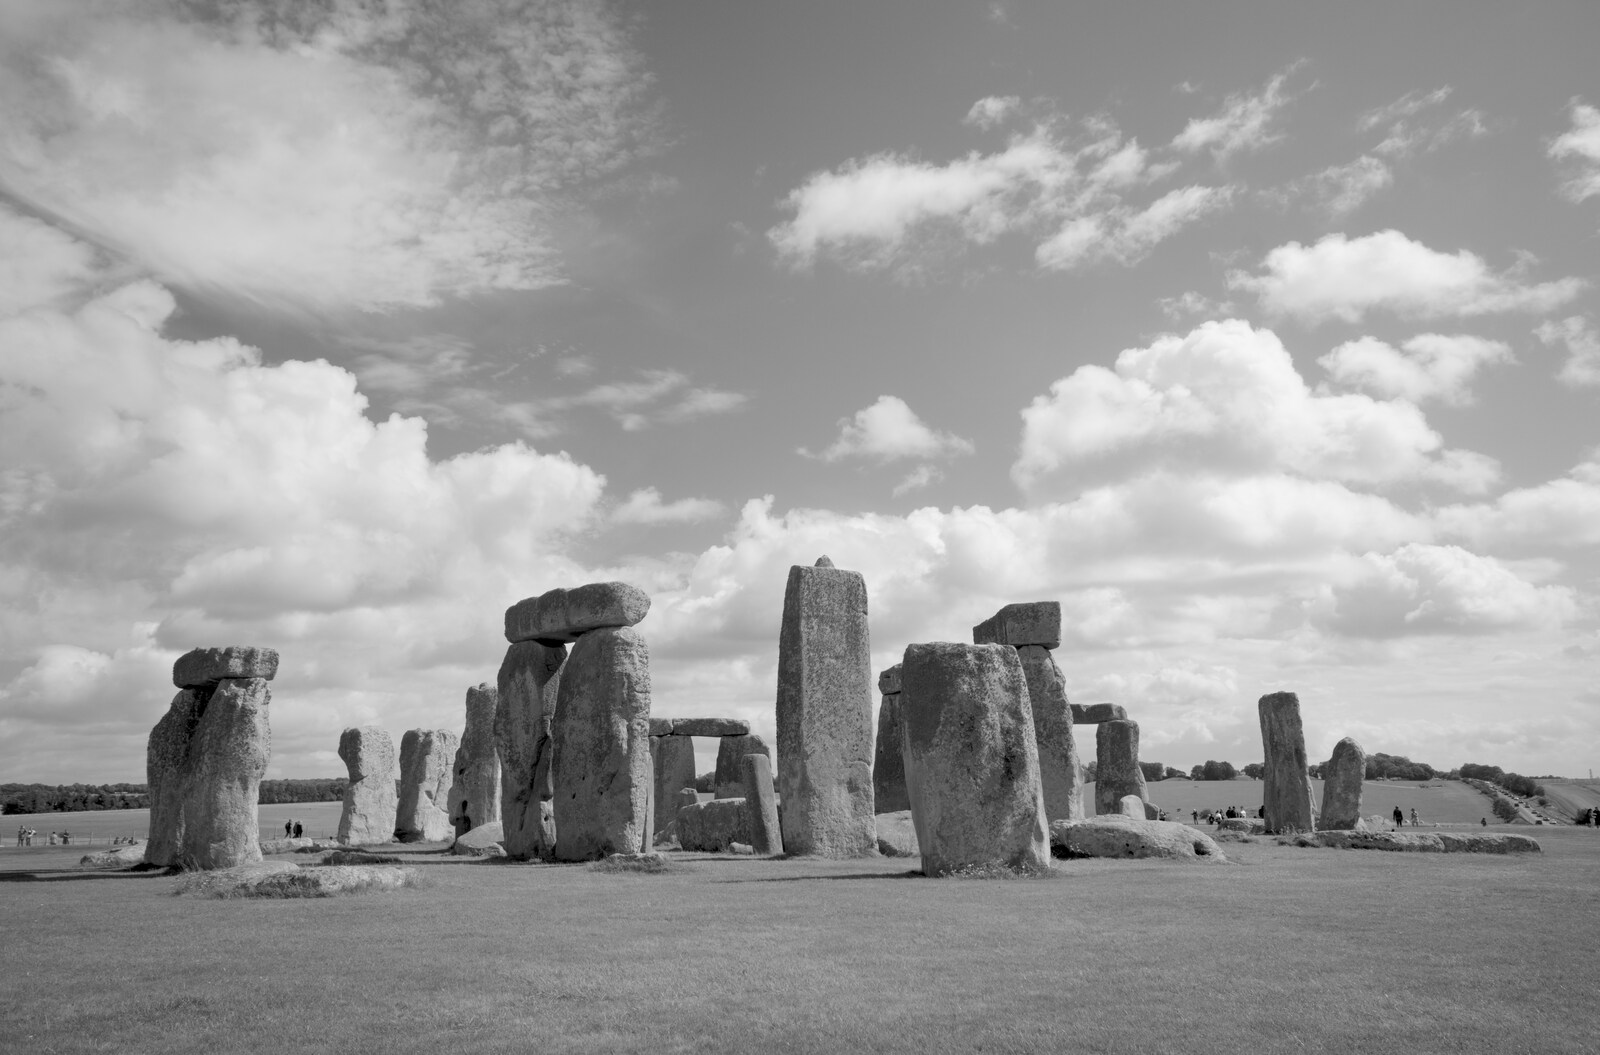 Another black-and-white view from Stone Circles: Stonehenge and Avebury, Wiltshire - 22nd August 2020